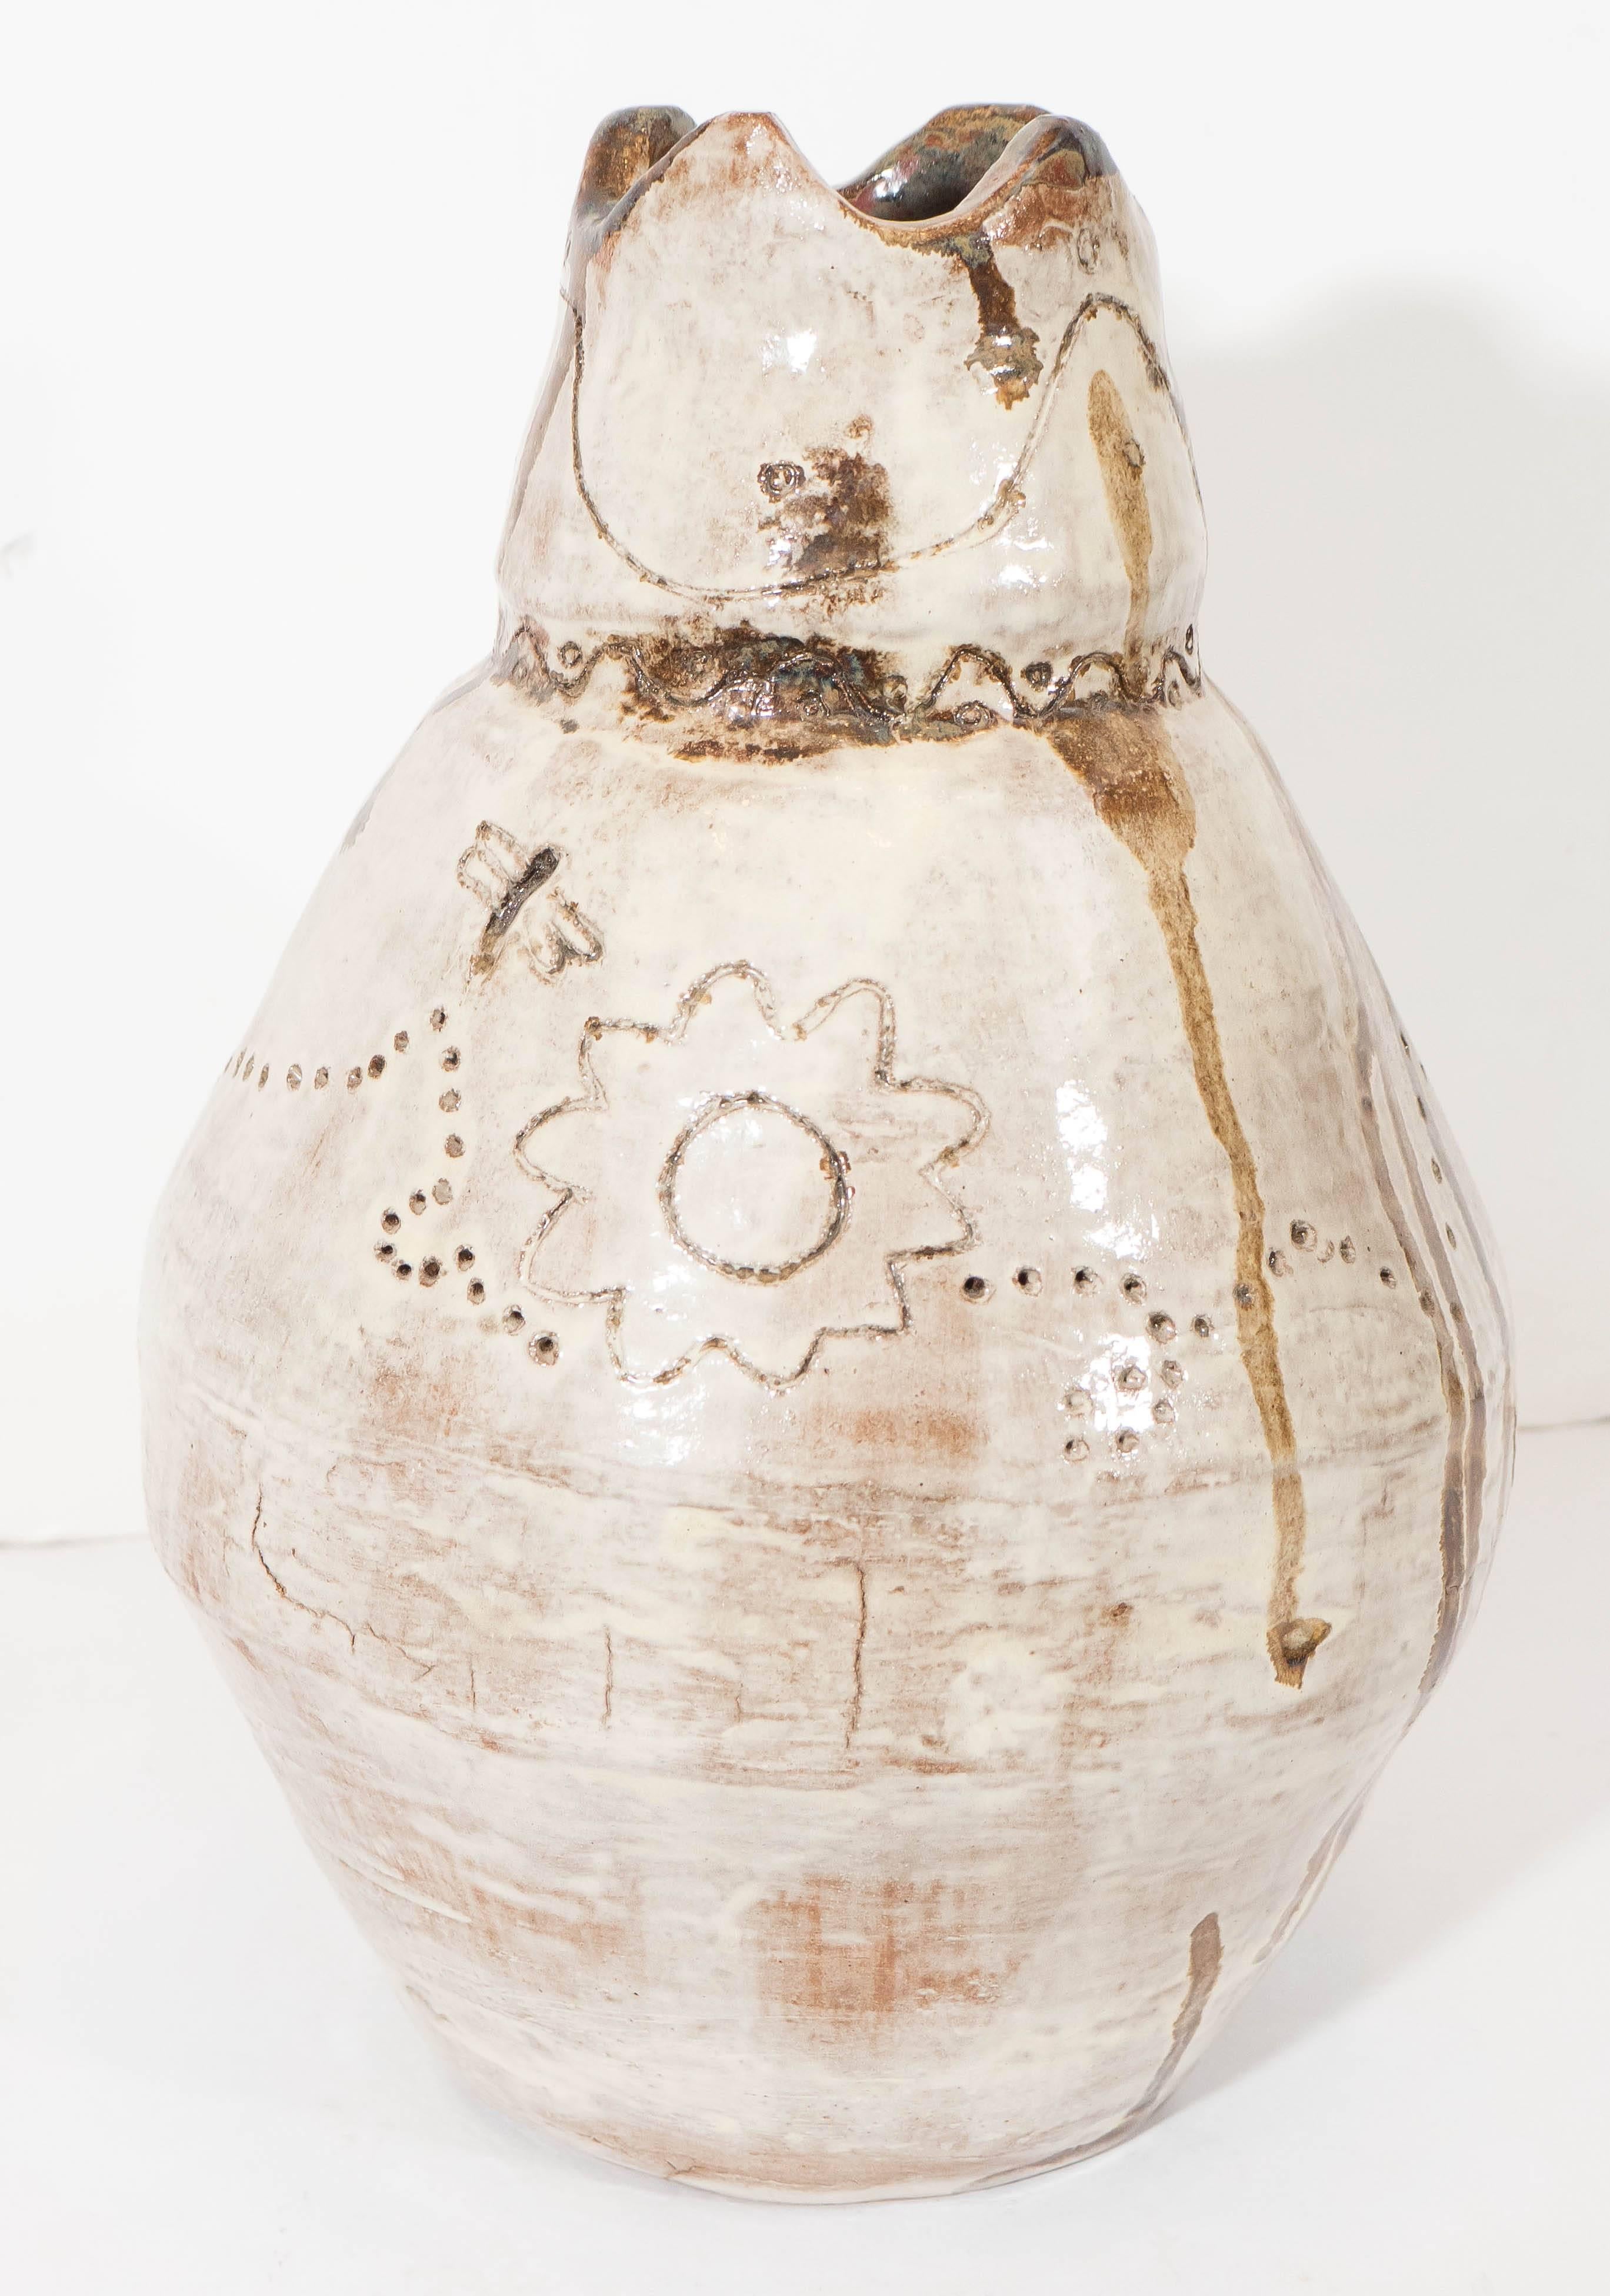 A hand-thrown gourd shaped vase, in glazed ceramic with incised details, rippled pattern to the neck, above details of bee and flower to the body. Despite presence of wear and cracking to base, the vase remains in good overall condition.